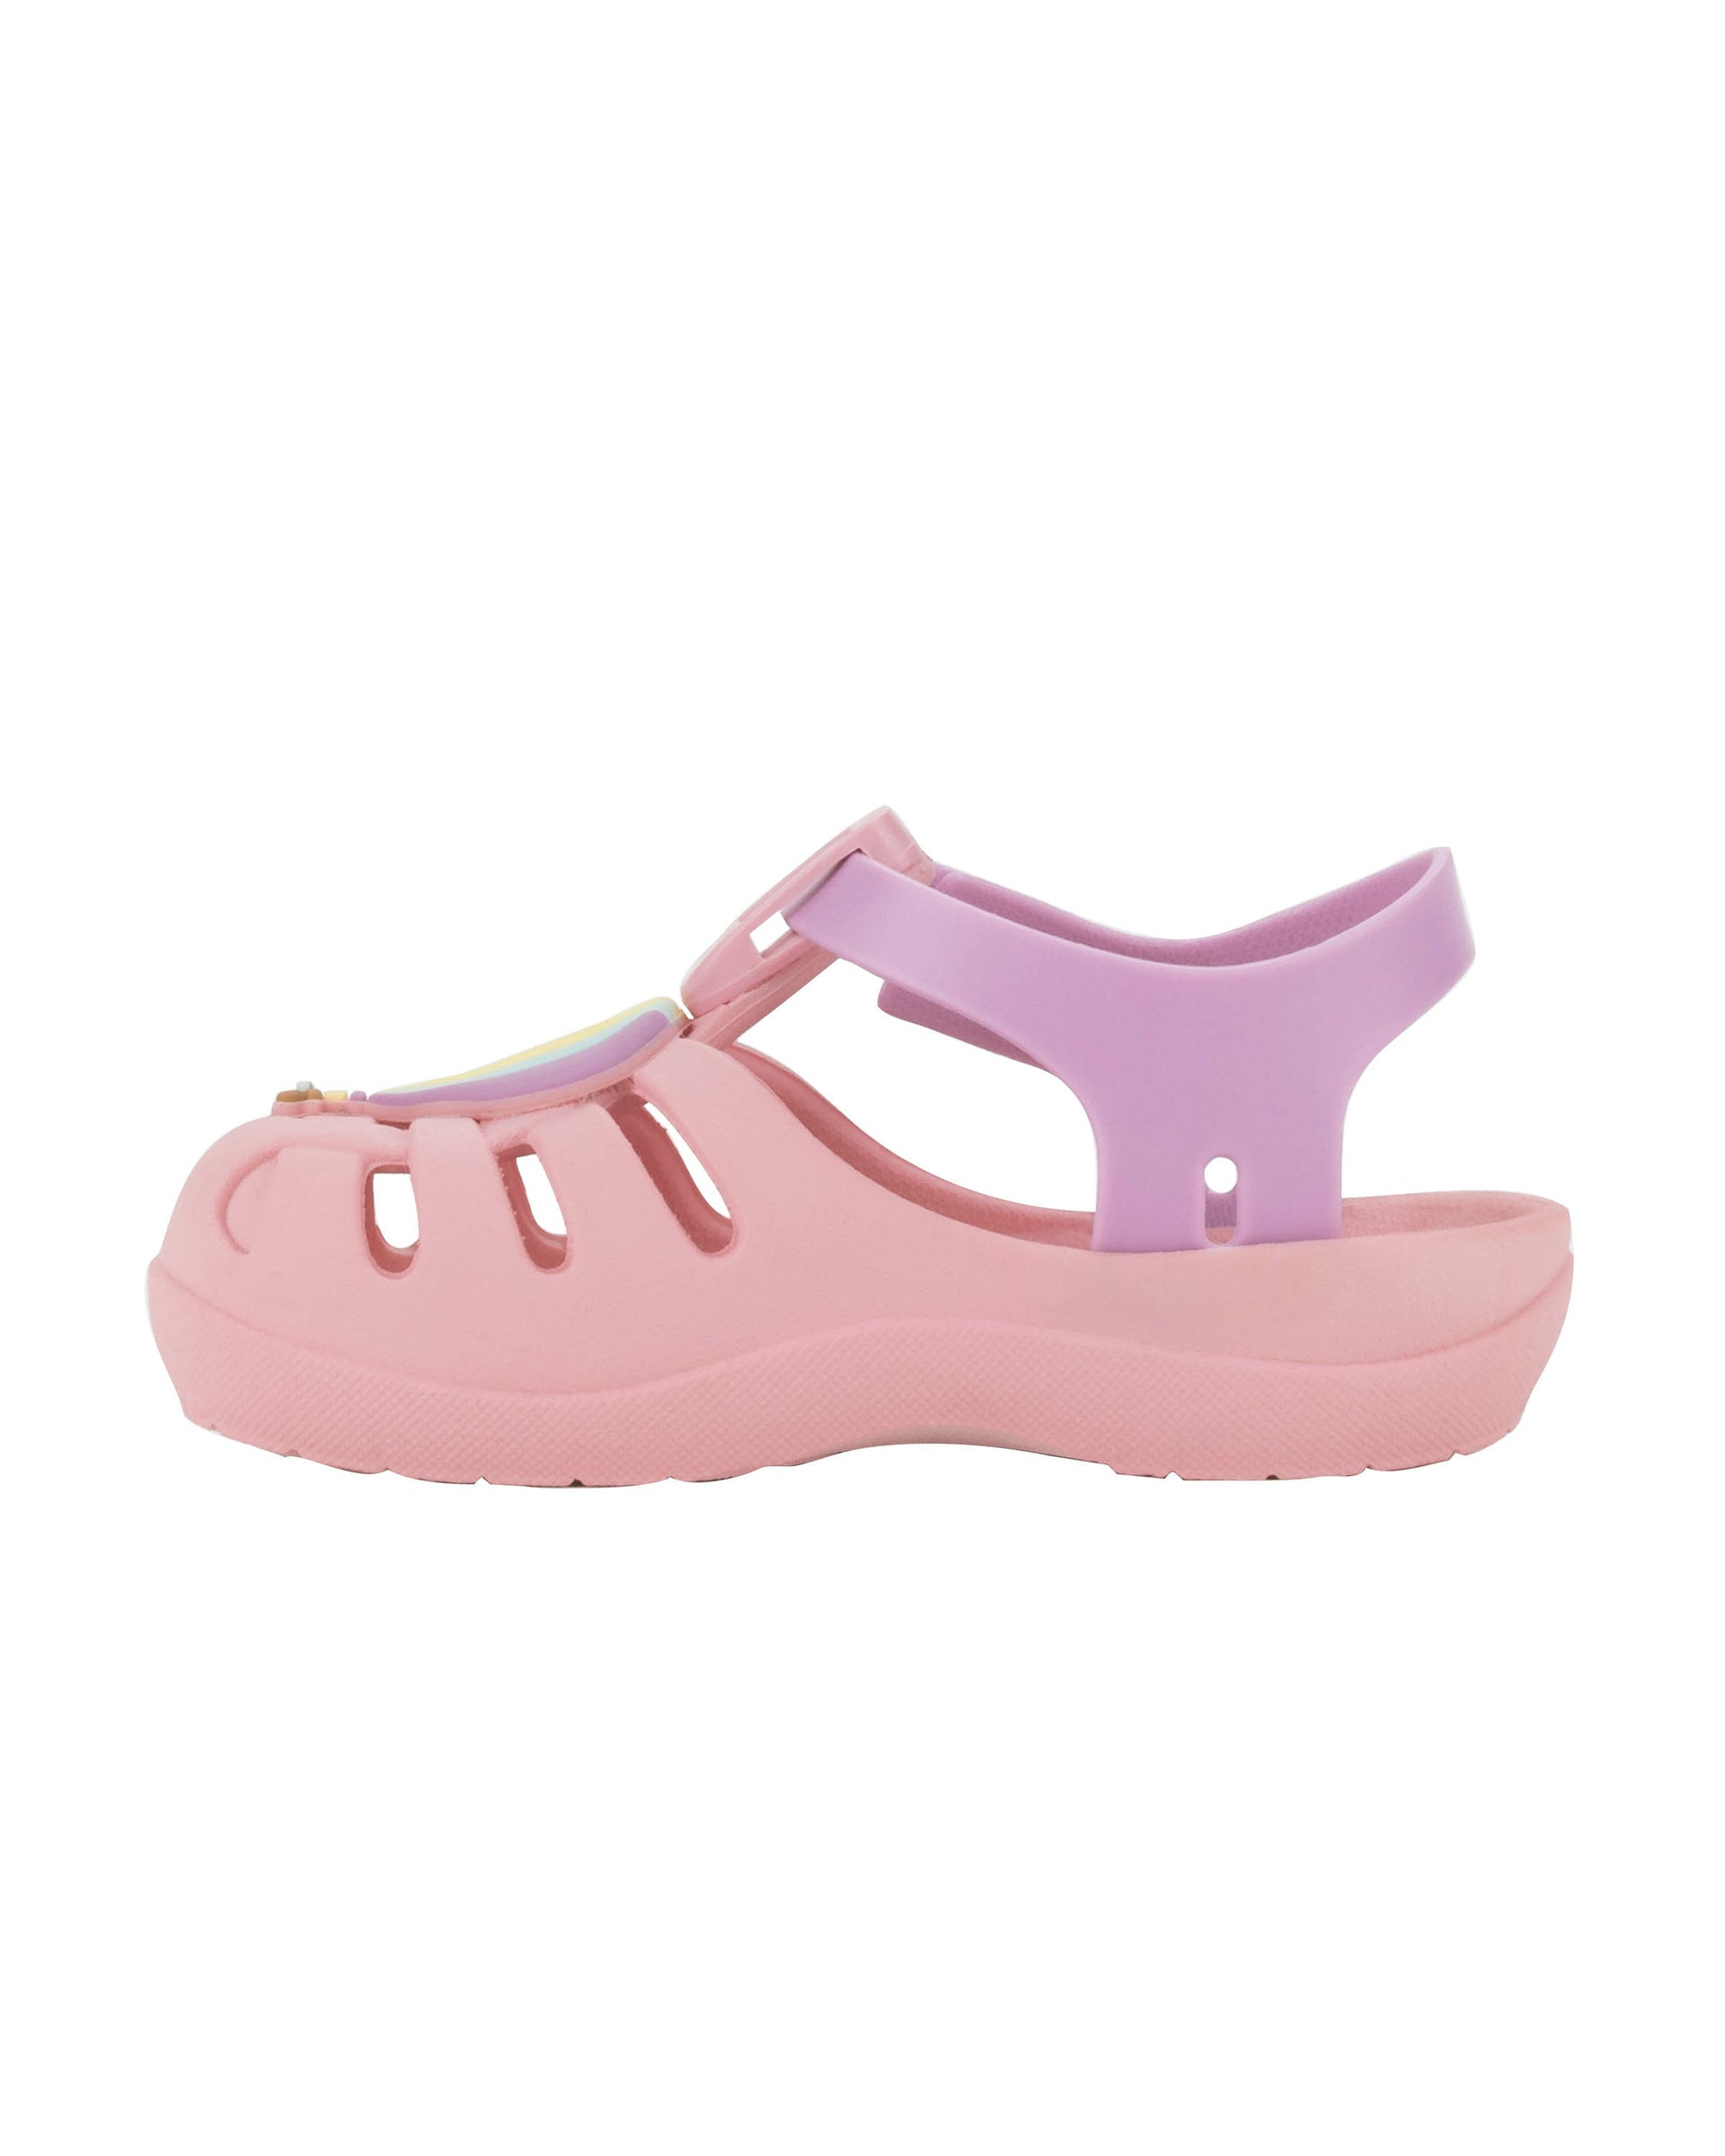 Inner side view of a pink Ipanema Summer baby sandal with hot air balloon on the upper.